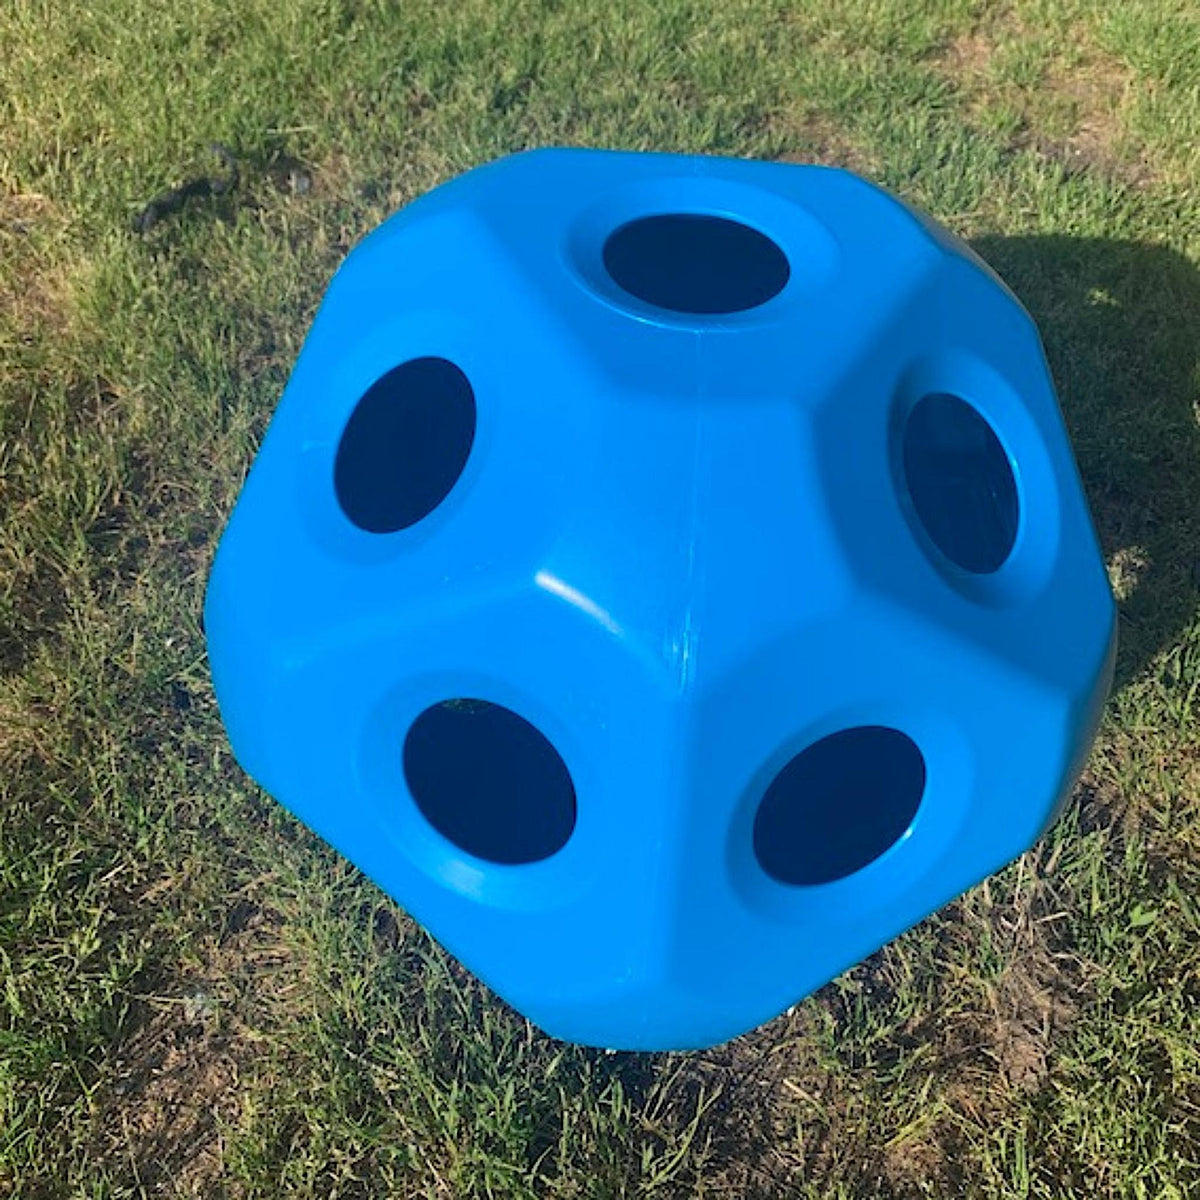 Blue plastic hay ball with flat sides and moderately sized holes throughout.